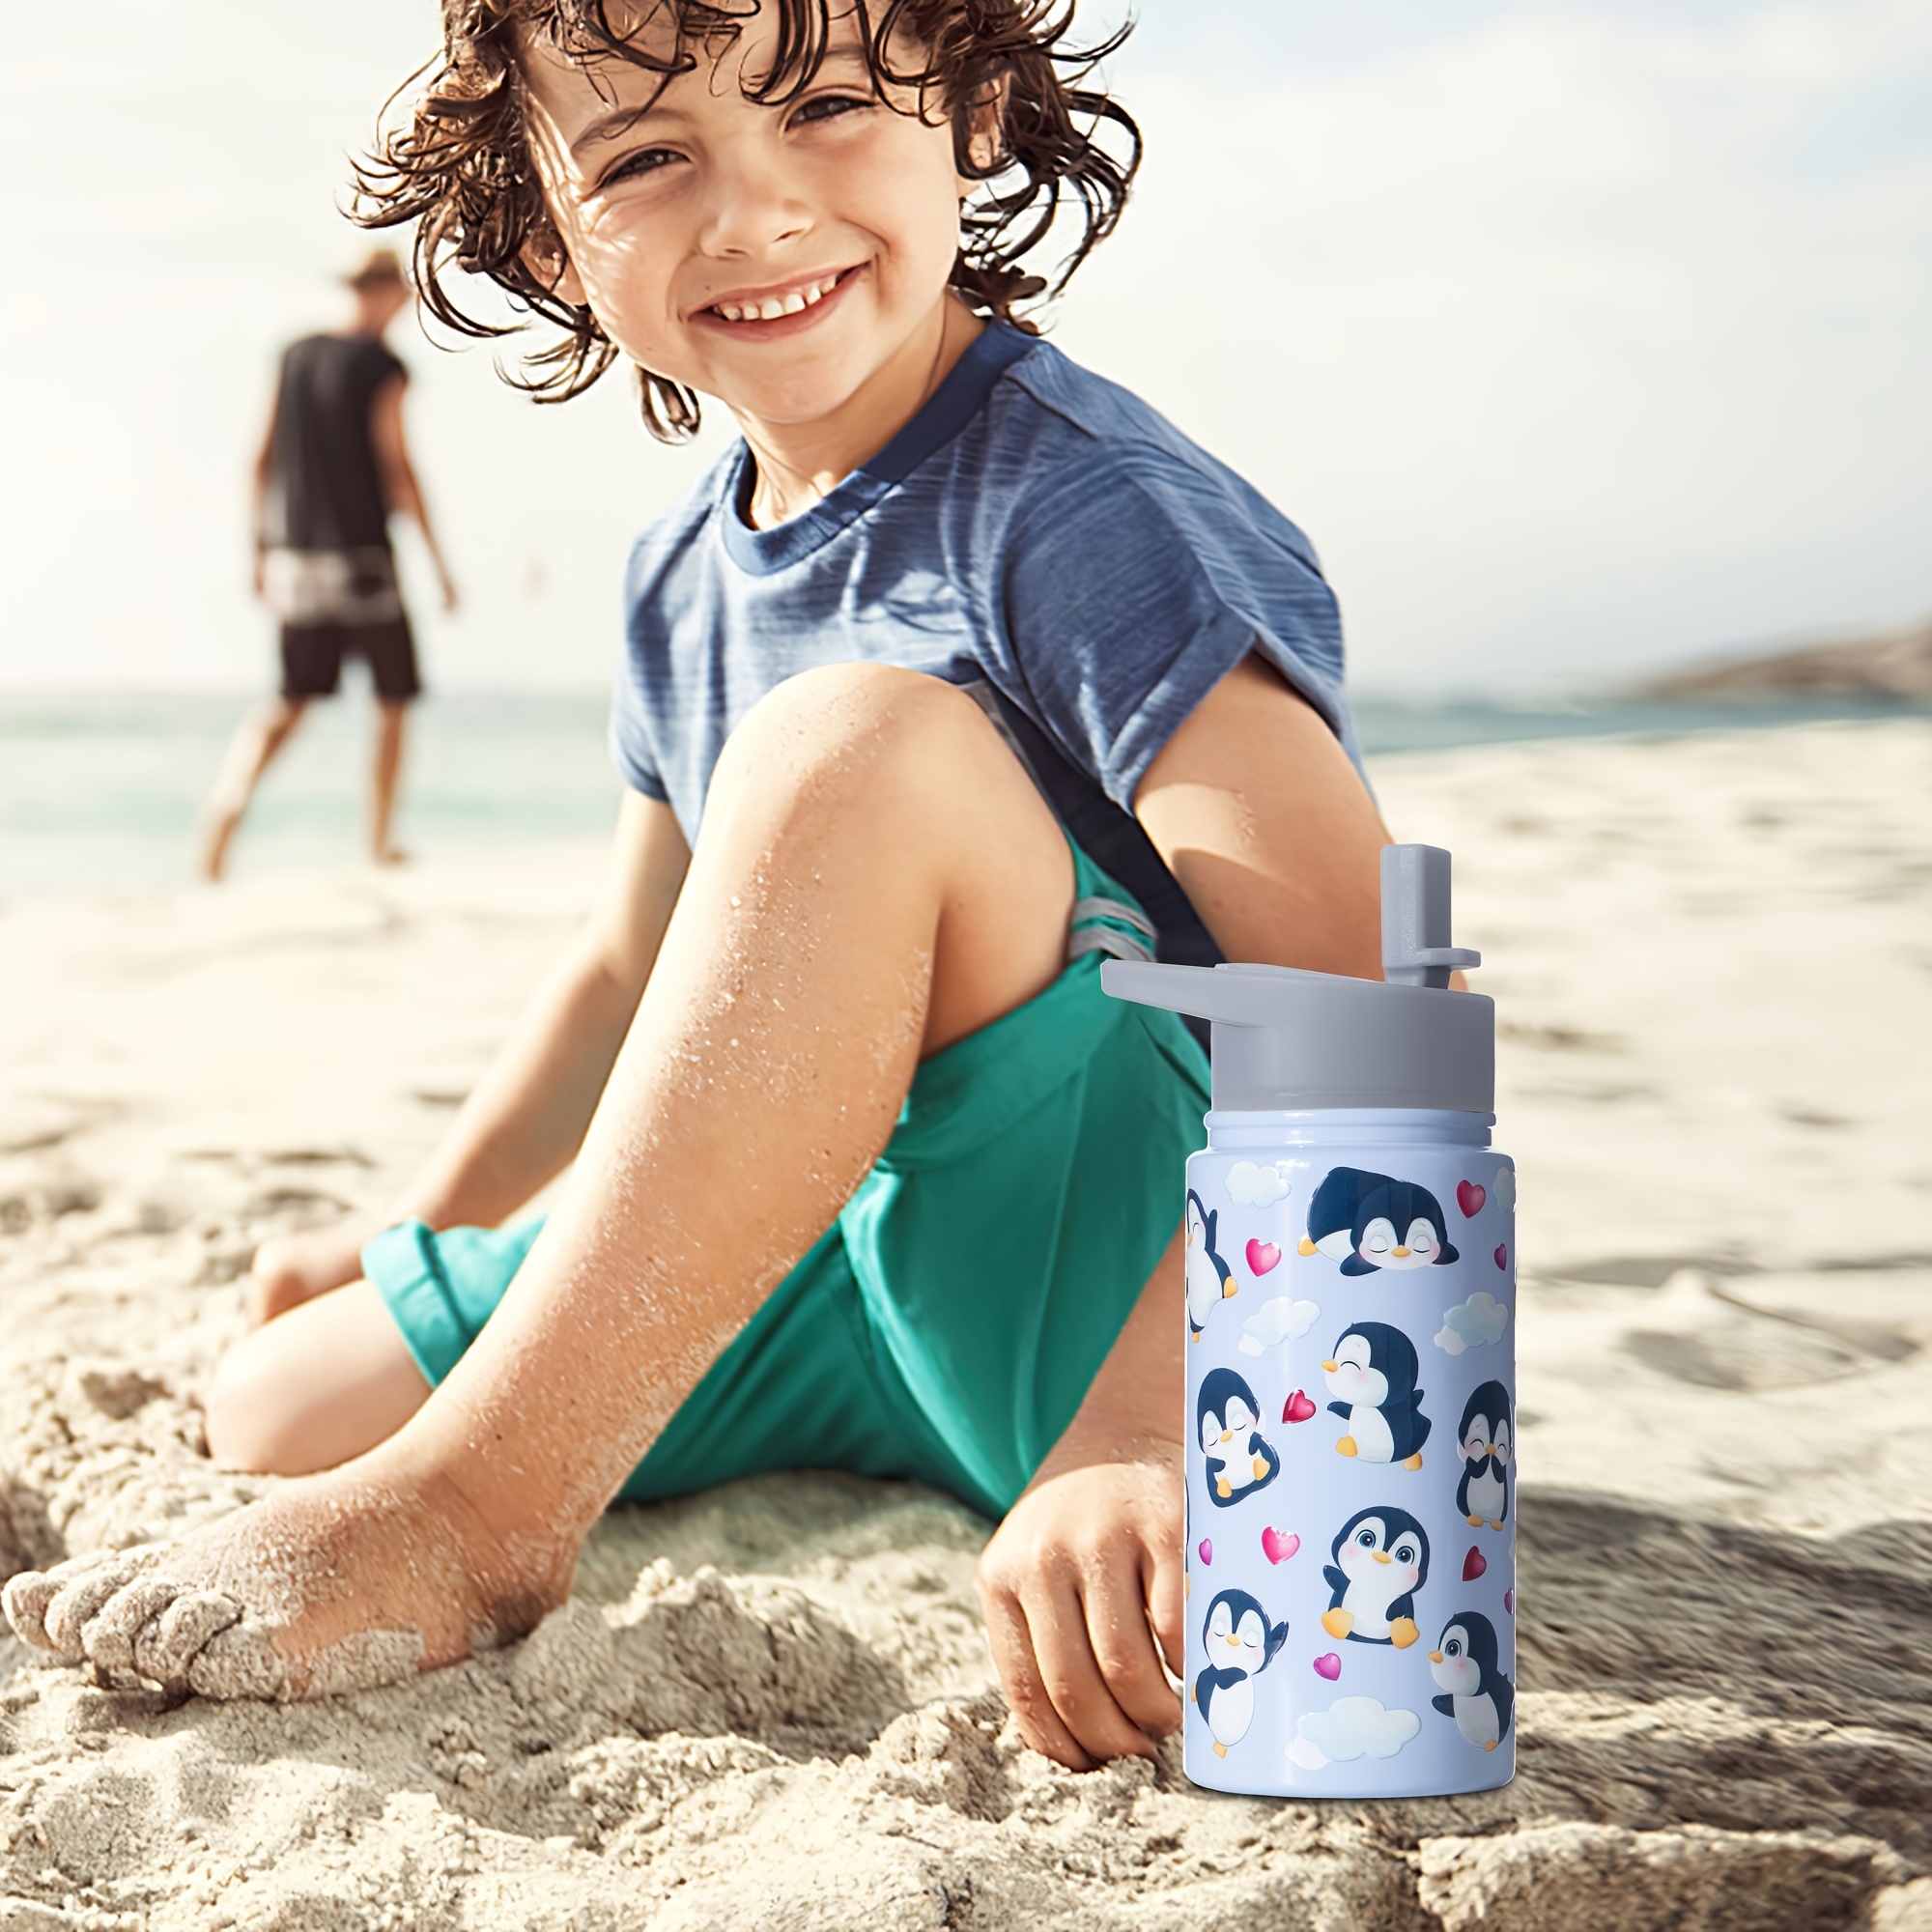 Junior Insulated Stainless Steel Filtered Water Bottle from